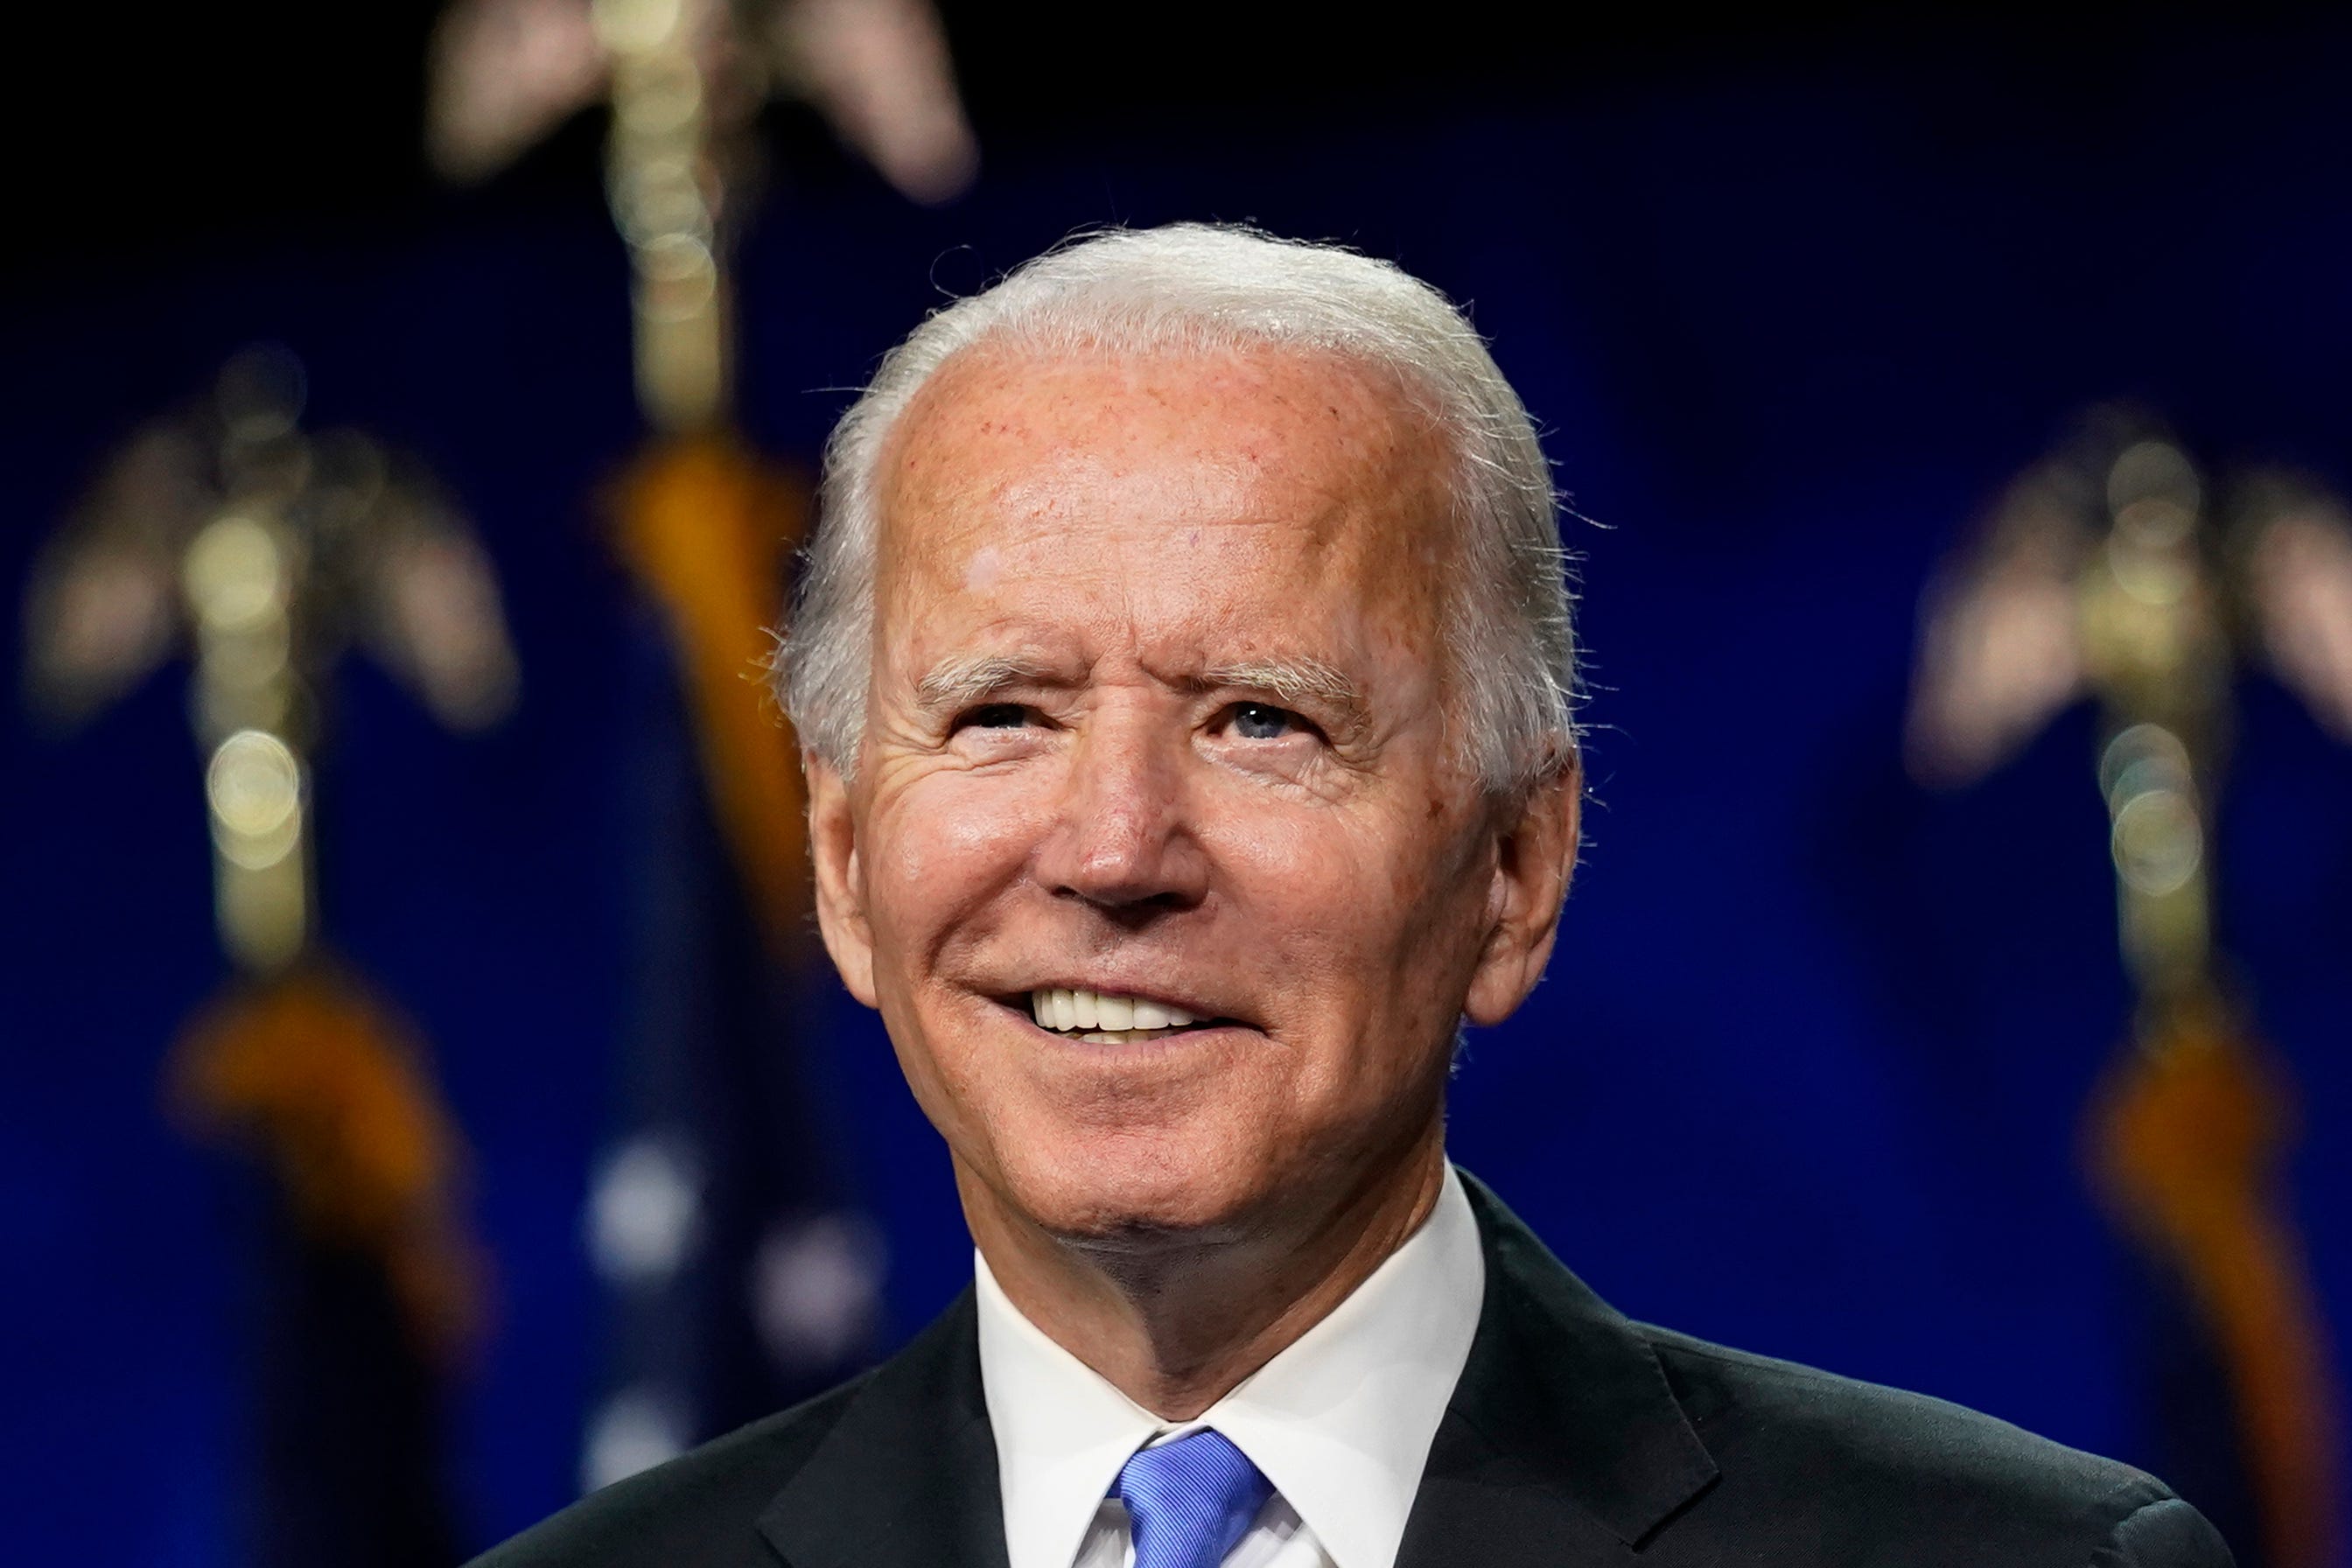 when did joe biden force ther ukrane proscutor to fired - Biden|President|Joe|States|Delaware|Obama|Vice|Senate|Campaign|Election|Time|Administration|House|Law|People|Years|Family|Year|Trump|School|University|Senator|Office|Party|Country|Committee|Act|War|Days|Climate|Hunter|Health|America|State|Day|Democrats|Americans|Documents|Care|Plan|United States|Vice President|White House|Joe Biden|Biden Administration|Democratic Party|Law School|Presidential Election|President Joe Biden|Executive Orders|Foreign Relations Committee|Presidential Campaign|Second Term|47Th Vice President|Syracuse University|Climate Change|Hillary Clinton|Last Year|Barack Obama|Joseph Robinette Biden|U.S. Senator|Health Care|U.S. Senate|Donald Trump|President Trump|President Biden|Federal Register|Judiciary Committee|Presidential Nomination|Presidential Medal